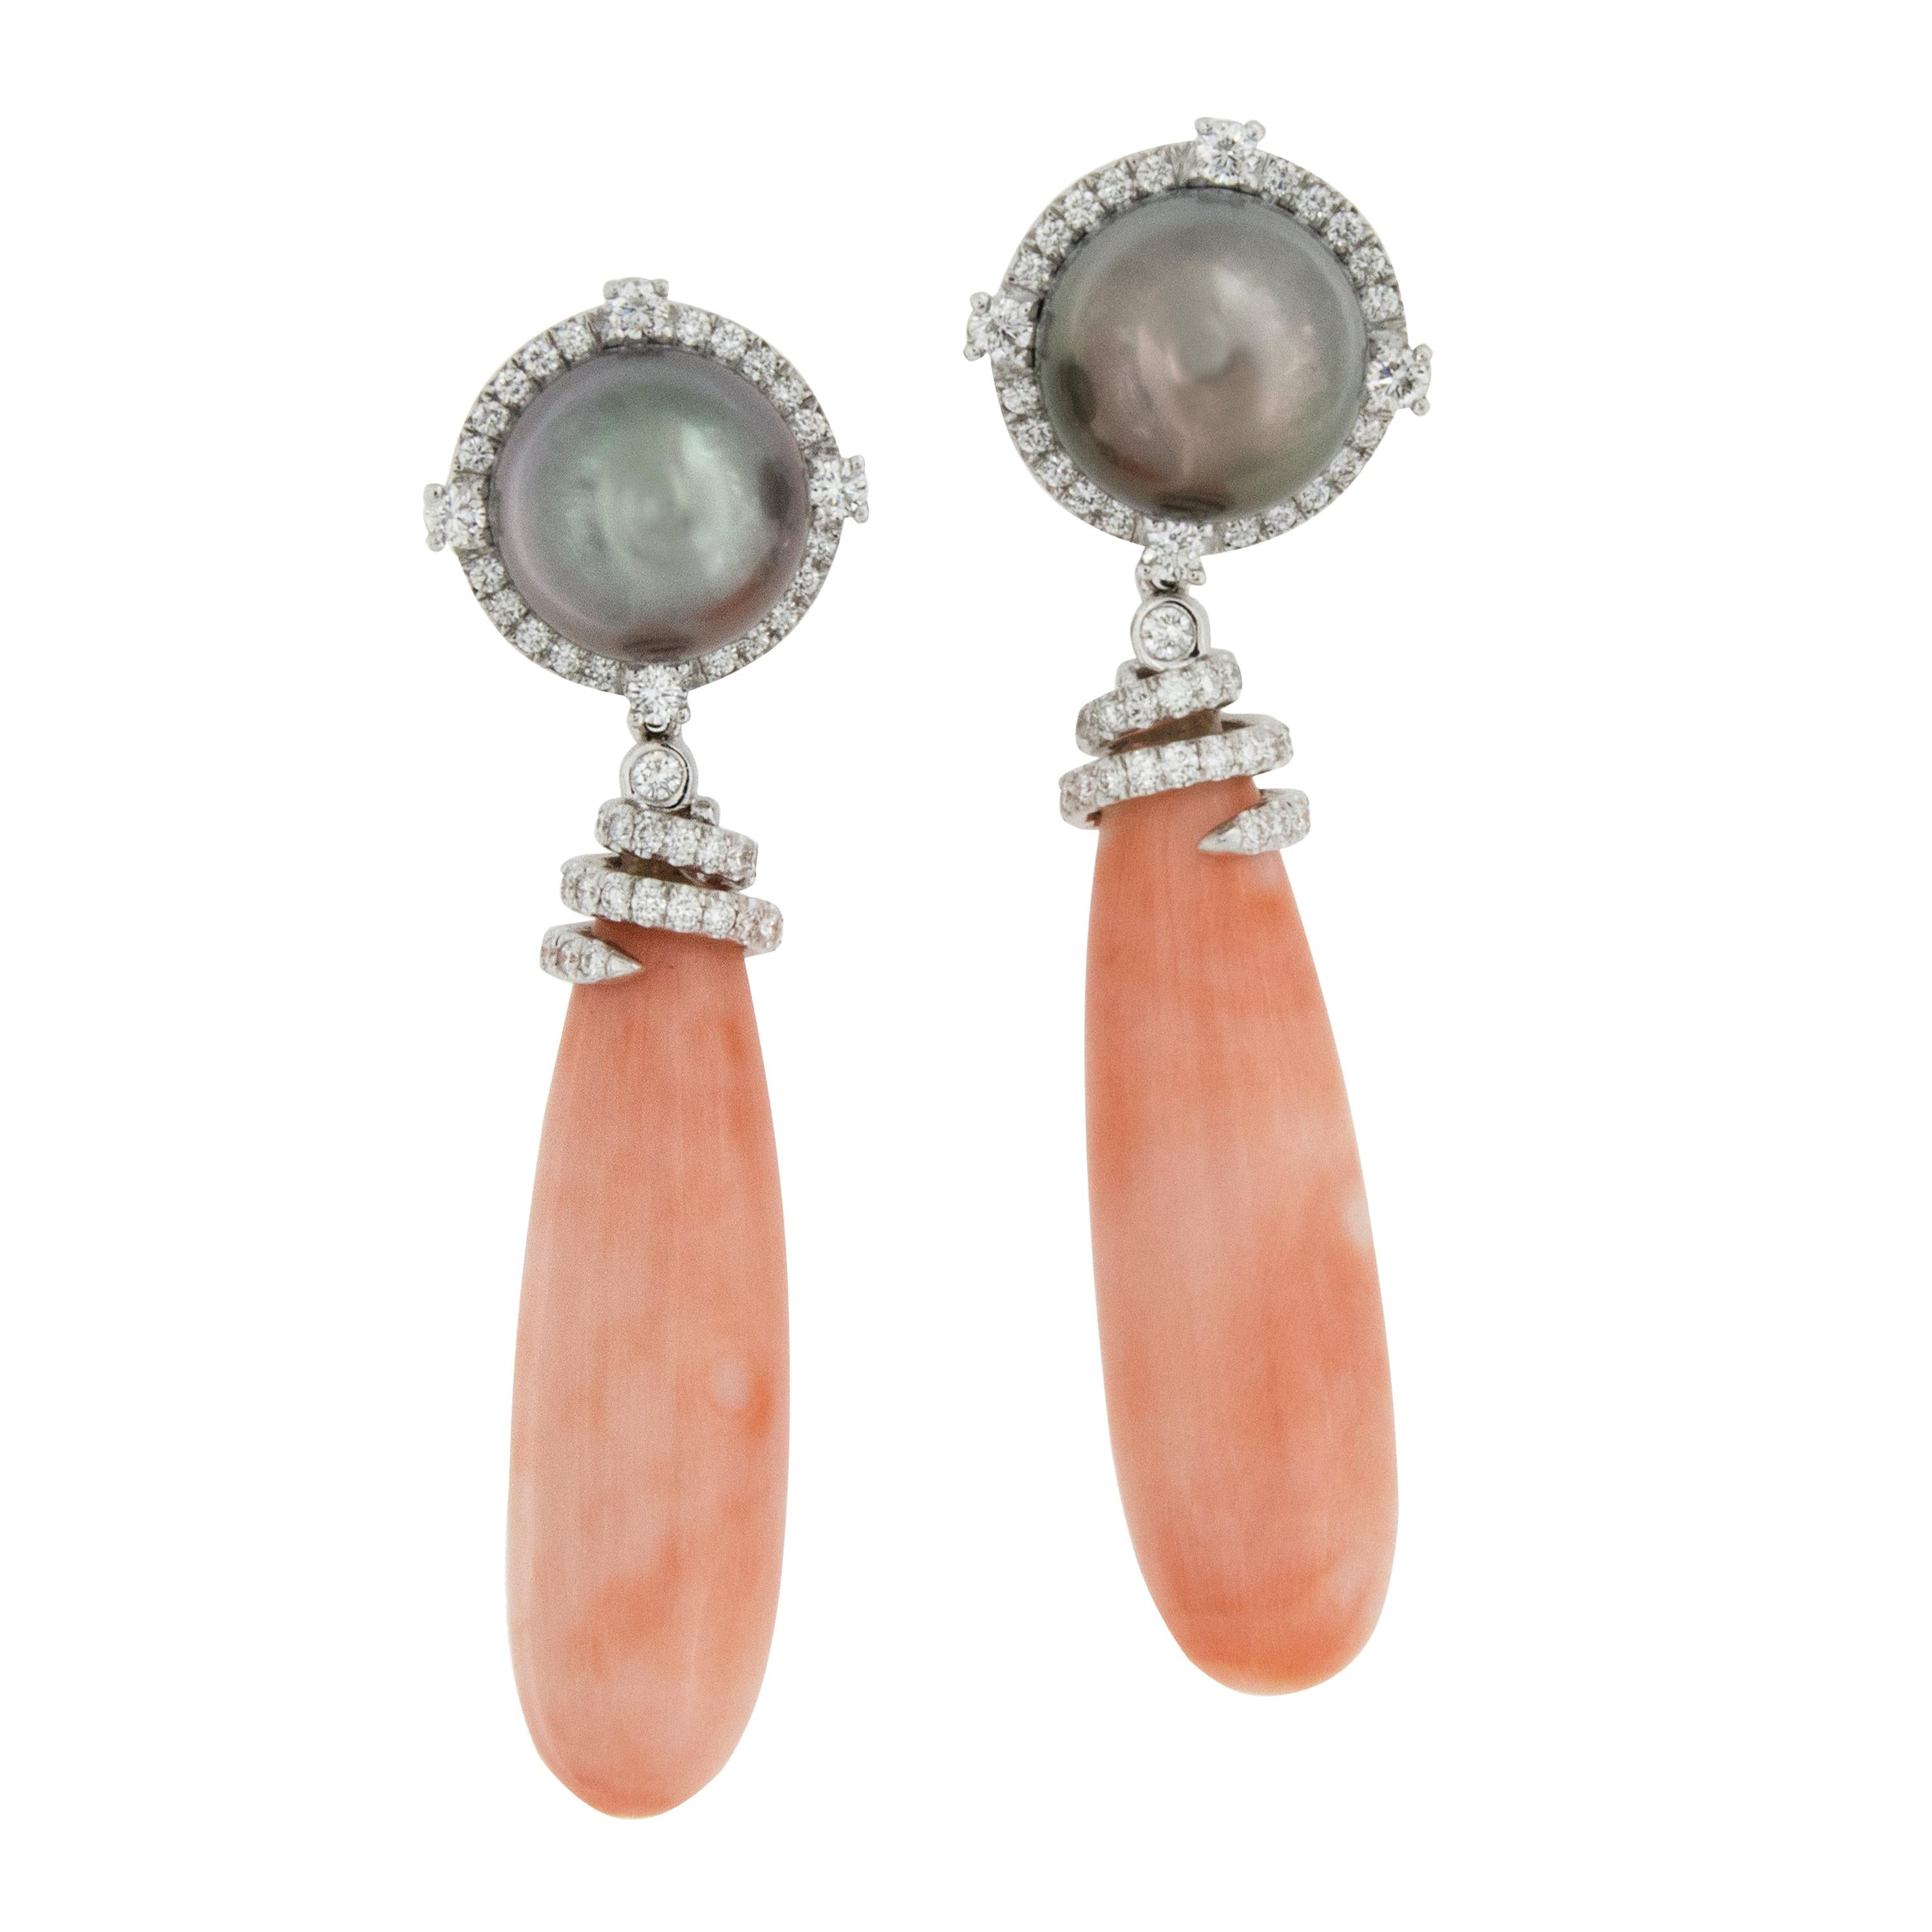 18 Karat White Gold Angelskin Coral and Tahitian Gray Pearl Earrings by Assael